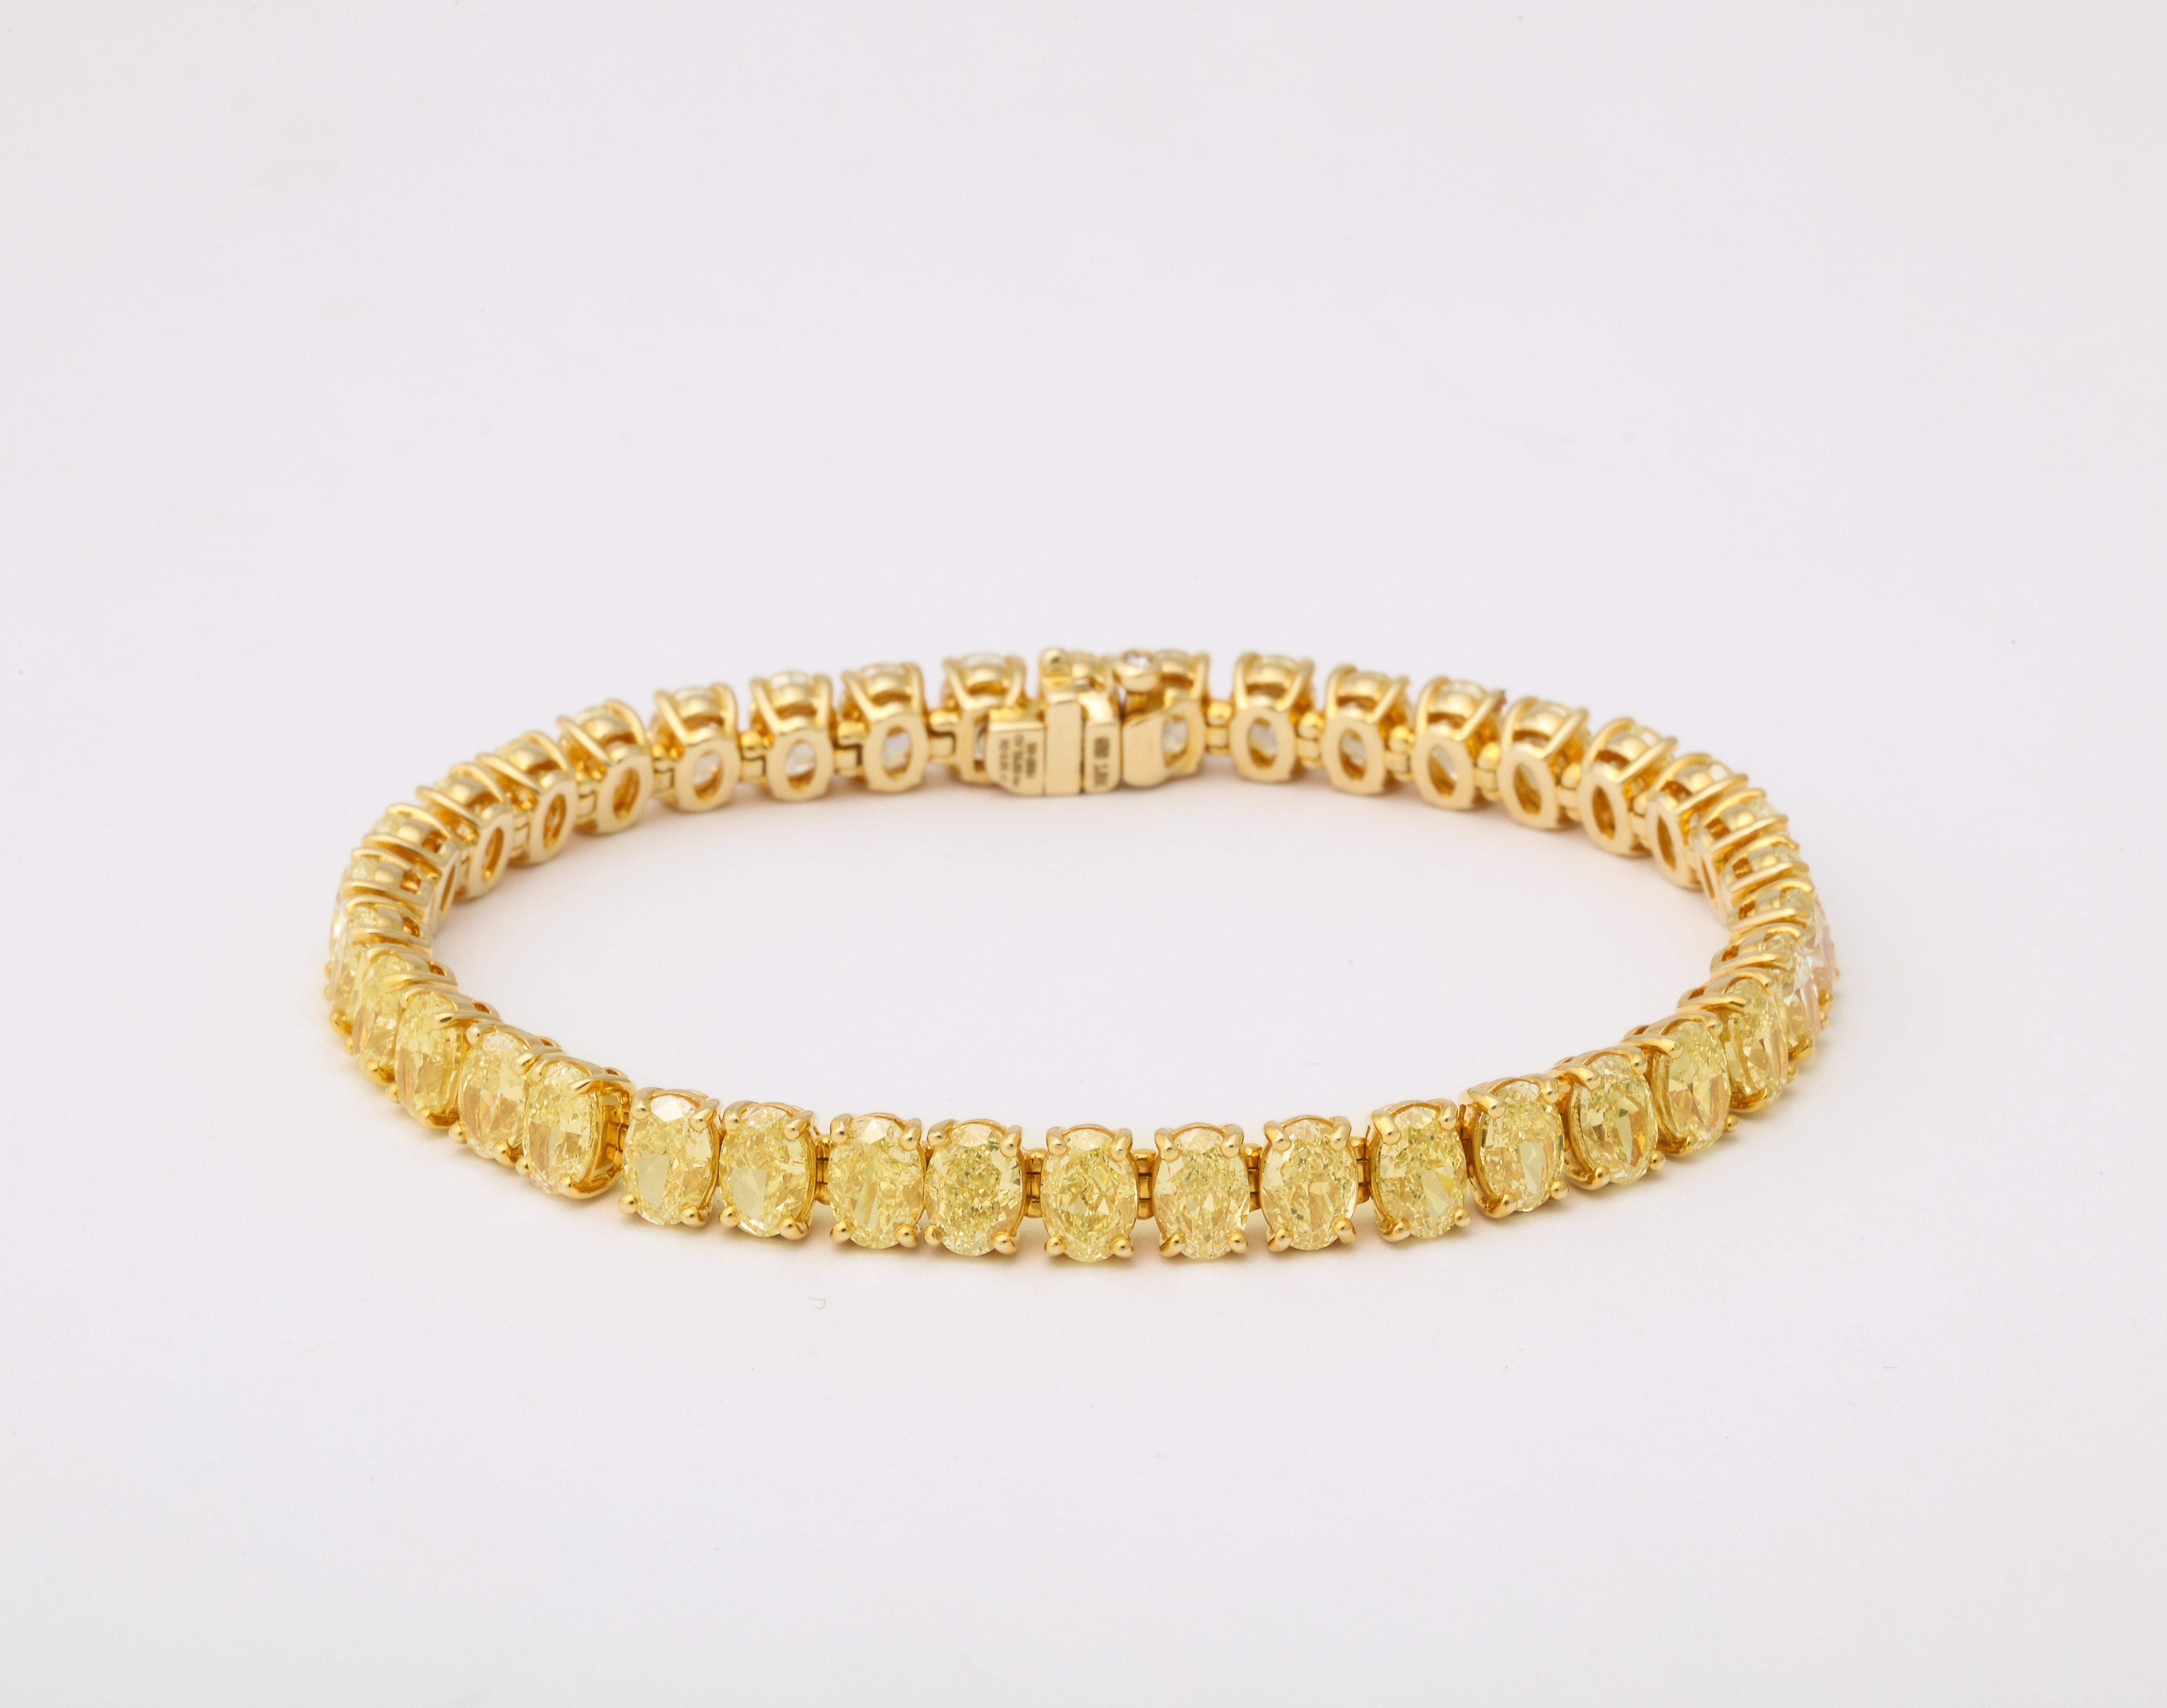 
An incredible collection of Oval Yellow Diamonds beautifully mounted in a line bracelet. 

19.06 carats of Yellow Diamond - each oval diamond averages half a carat in weight. 

Set in a custom made 18k yellow gold mounting

6.5 inch